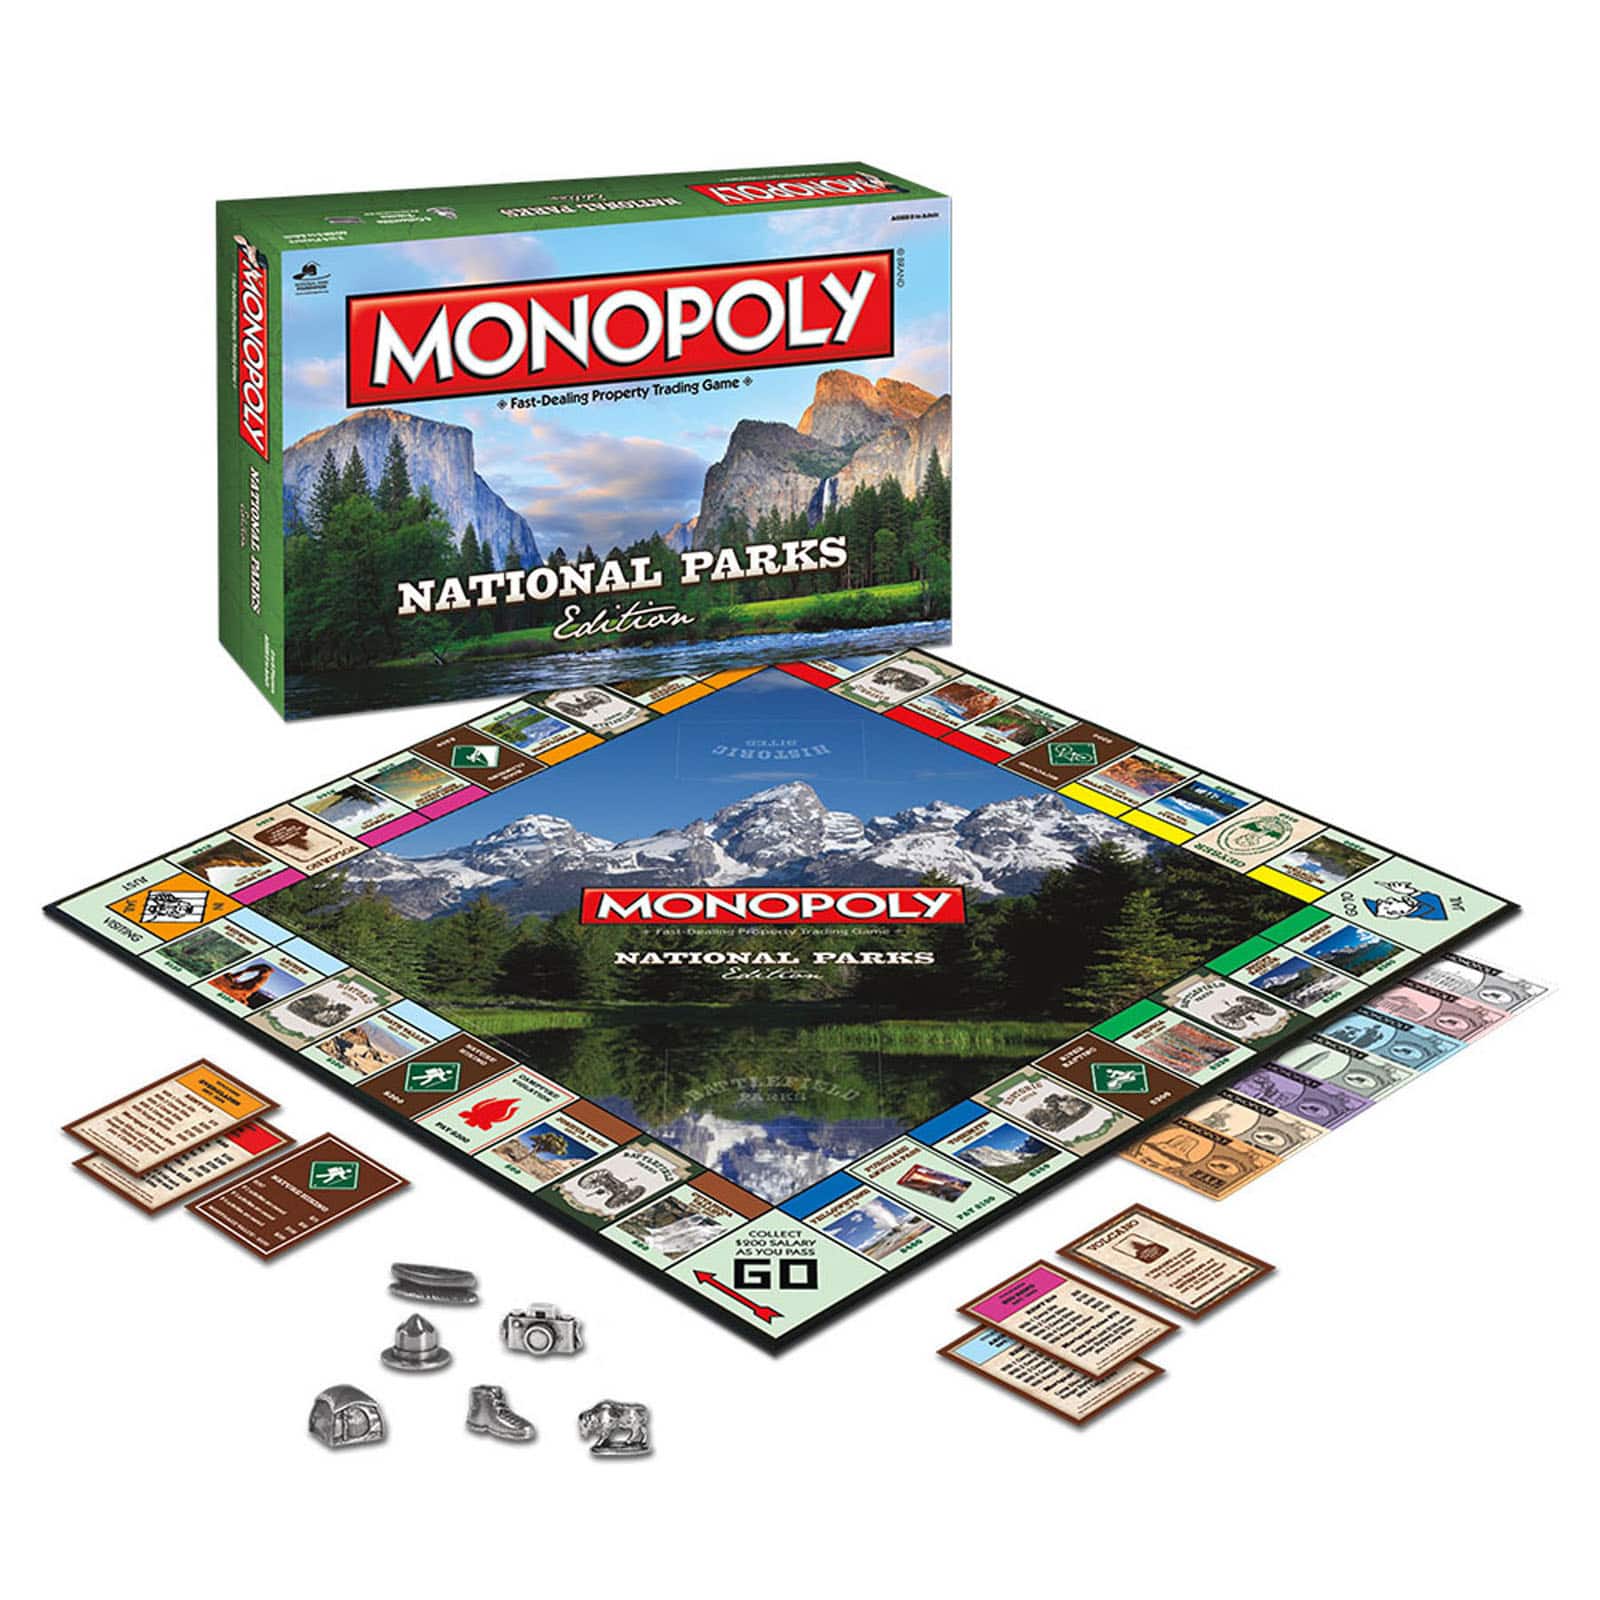 Monopoly&#xAE; National Parks Edition